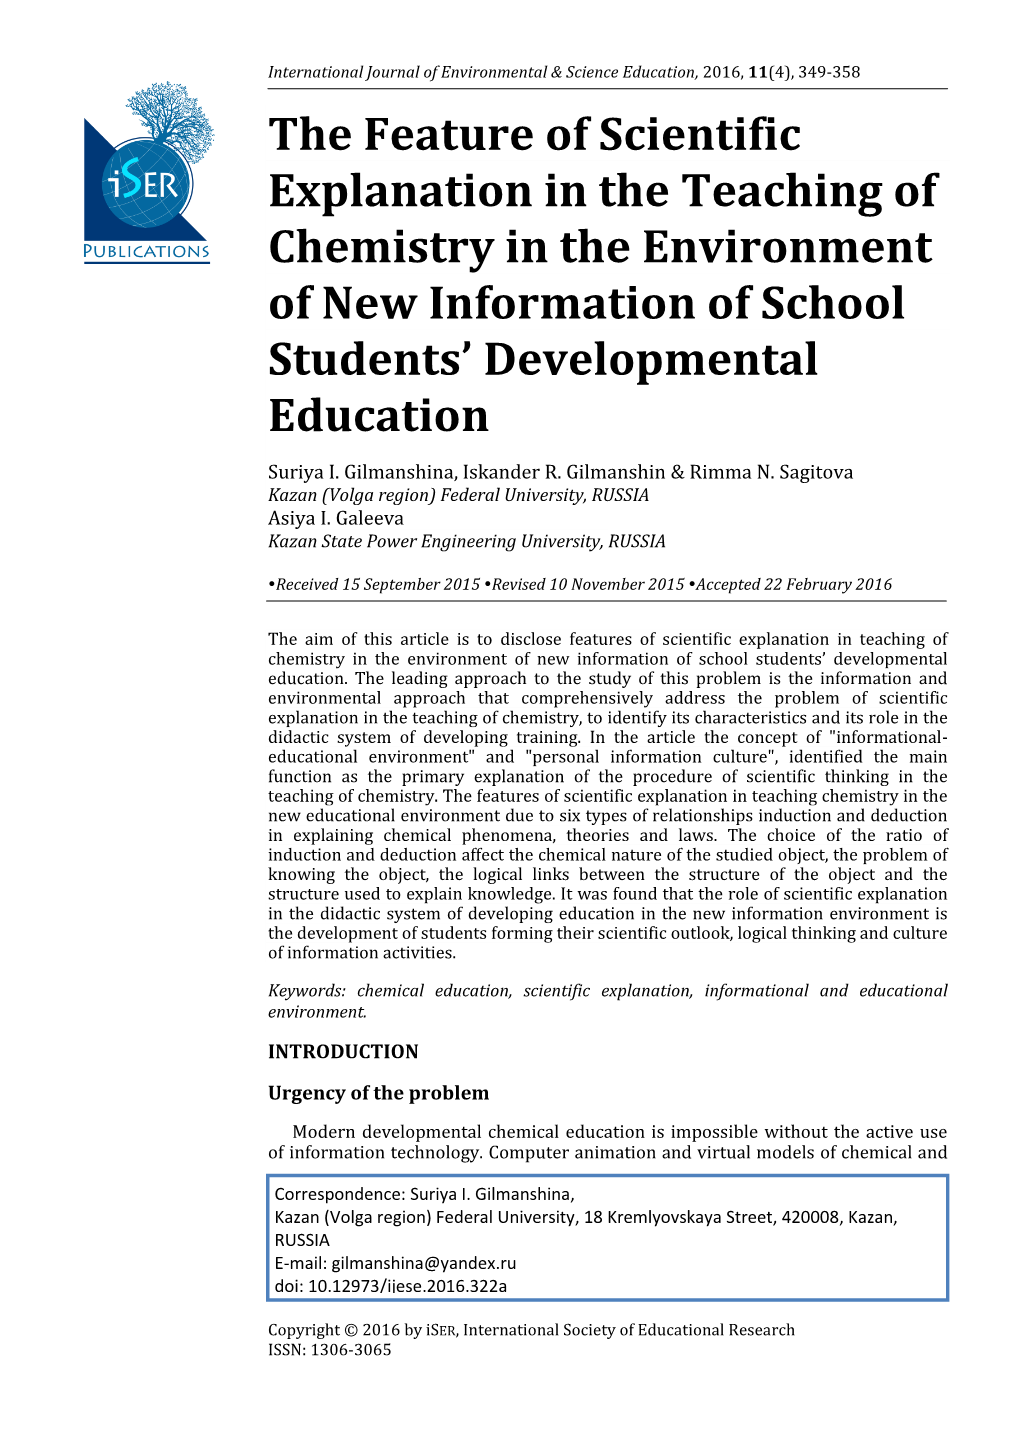 The Feature of Scientific Explanation in the Teaching of Chemistry in the Environment of New Information of School Students' D